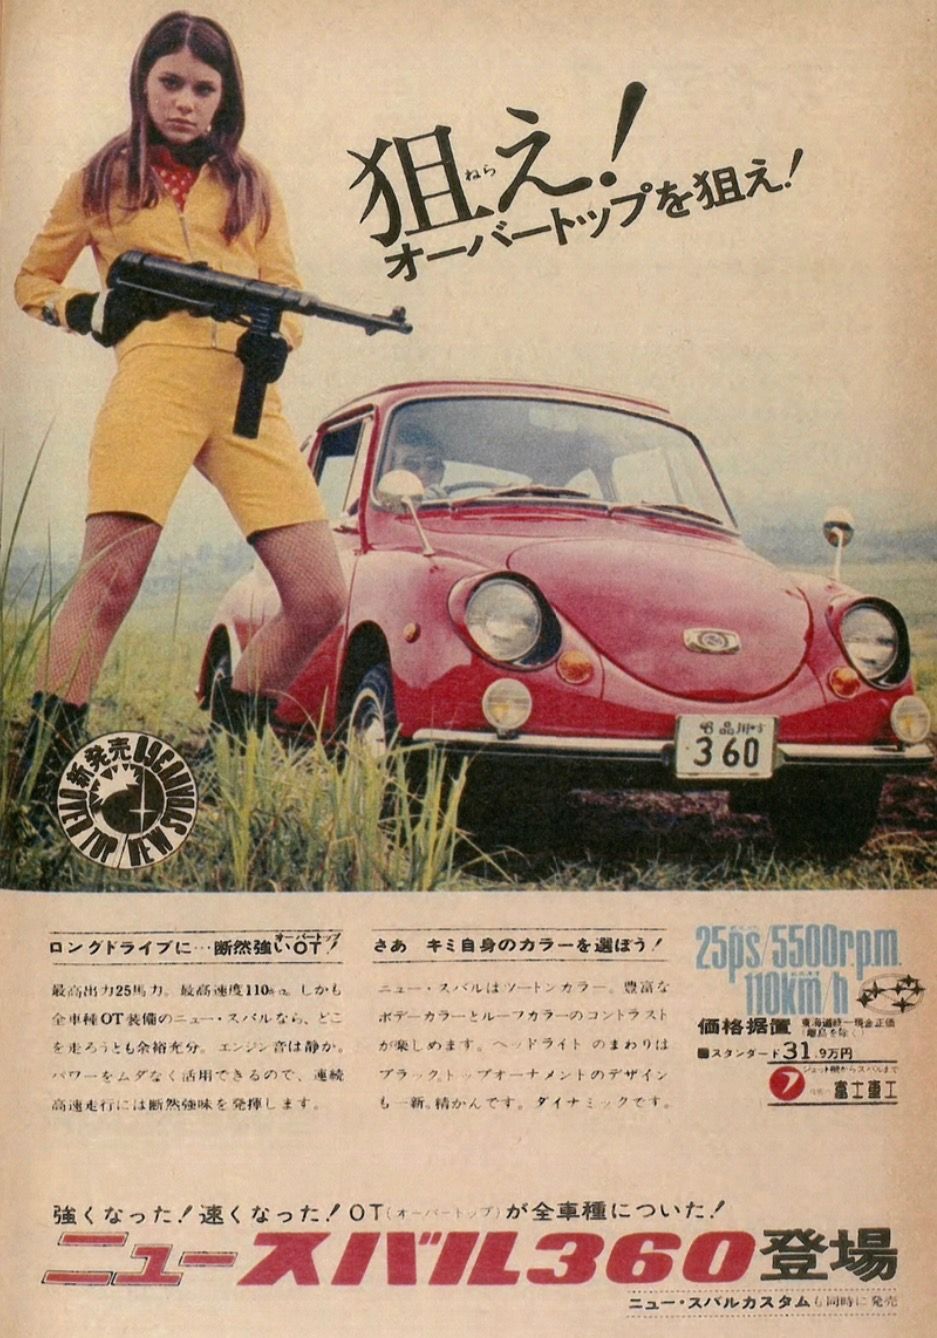 A Subaru Ad from the 1960s.jpg